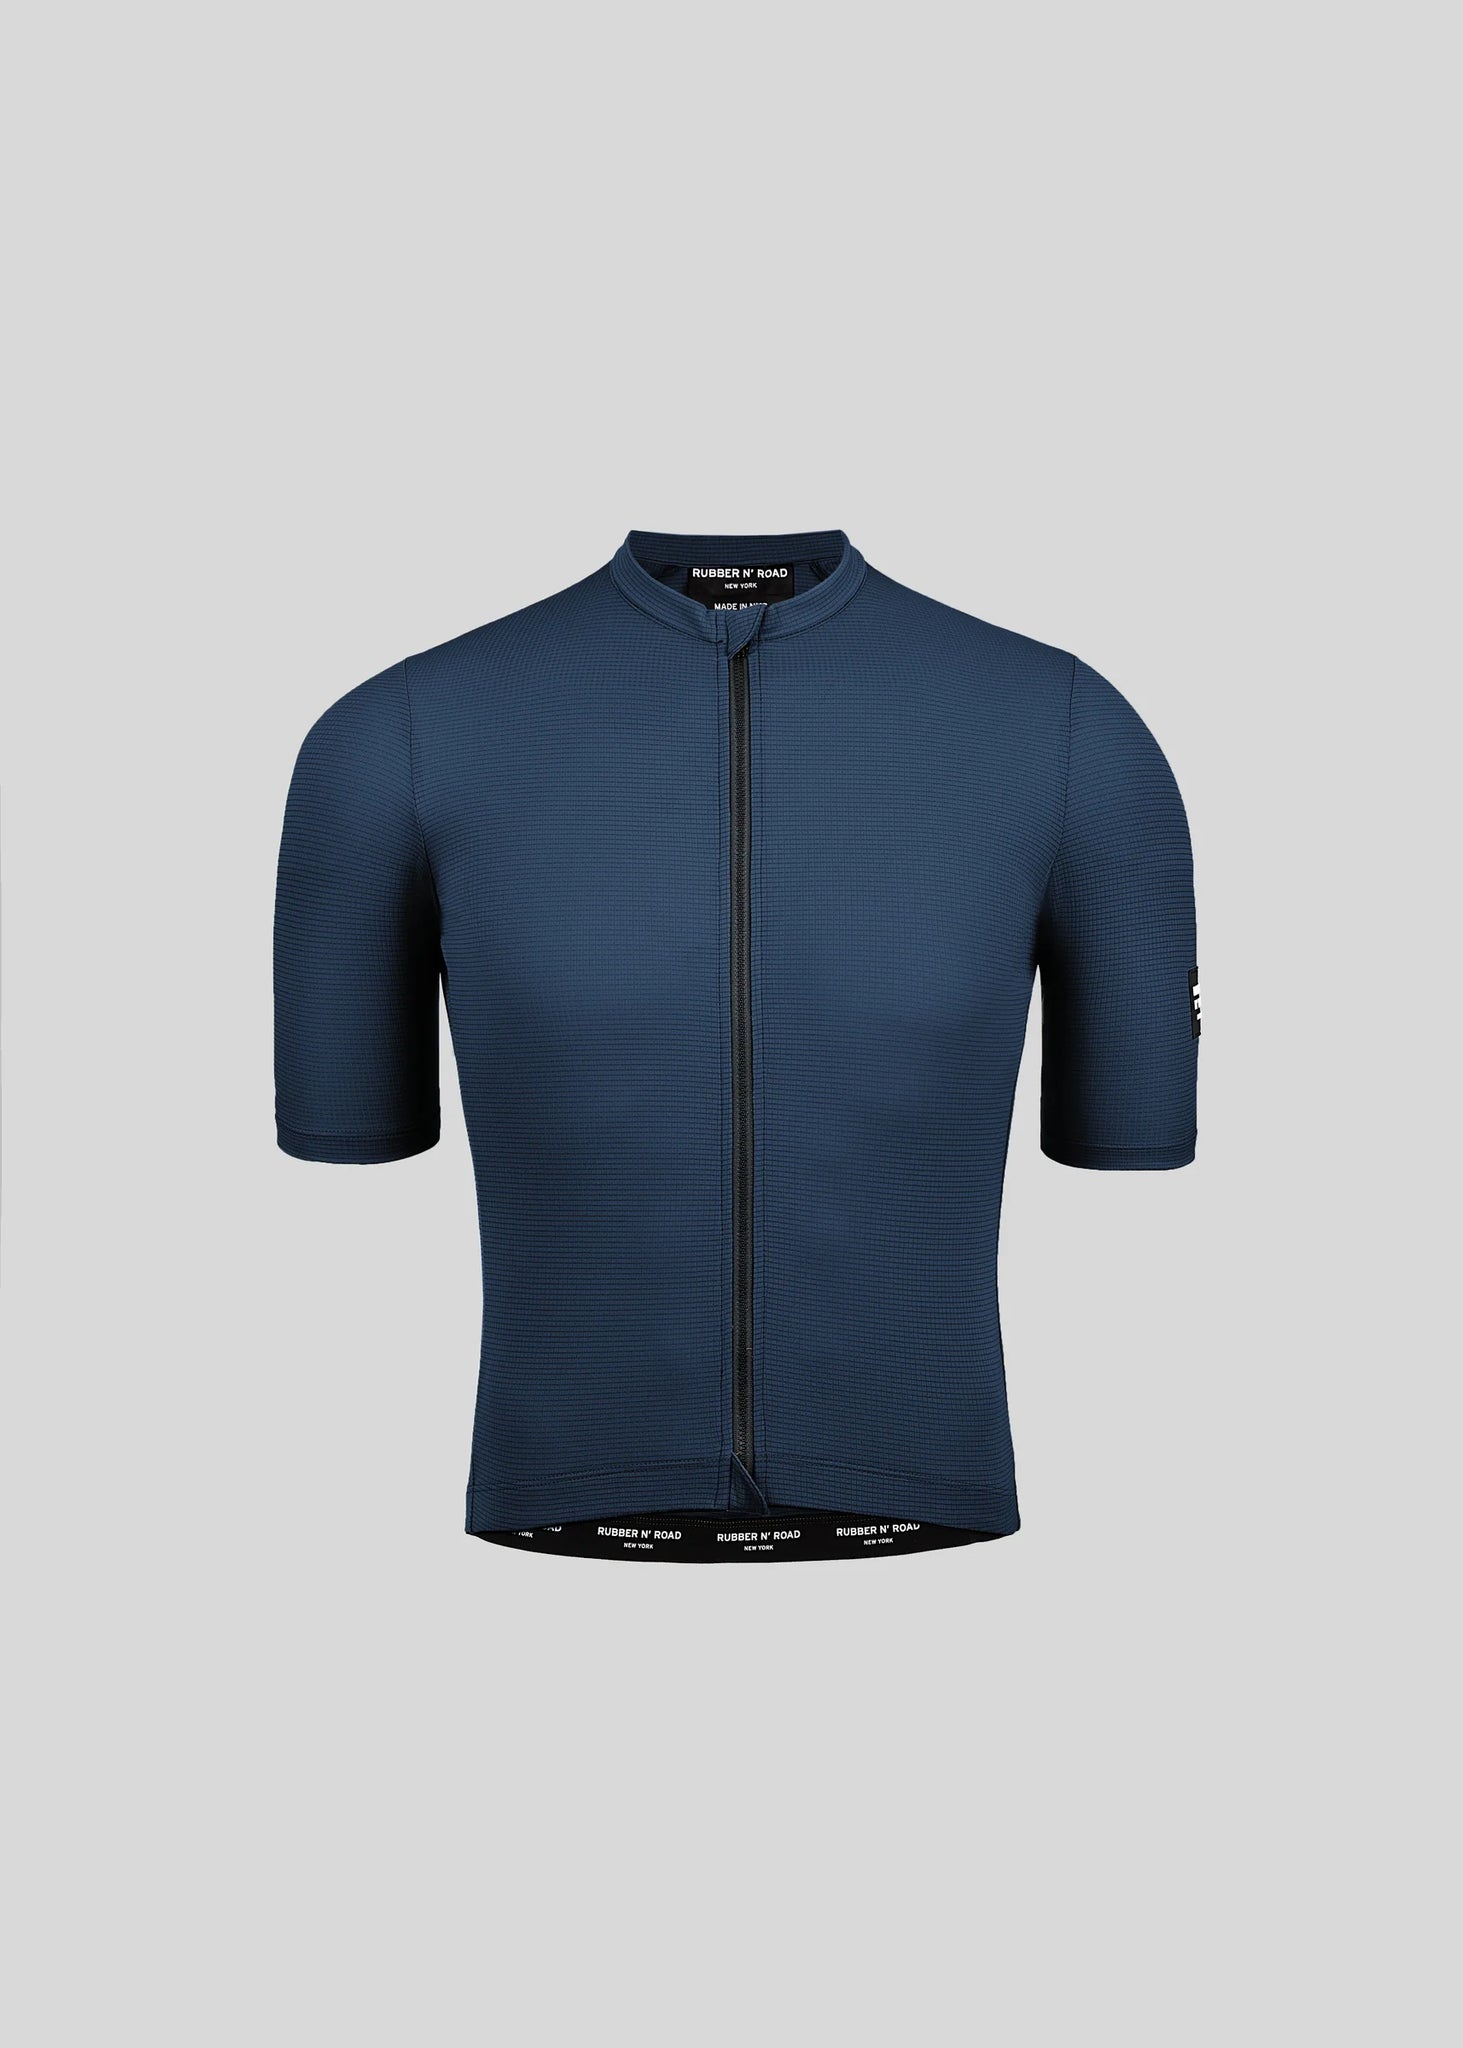 Rubber N Road | Control | High Humidity Jersey